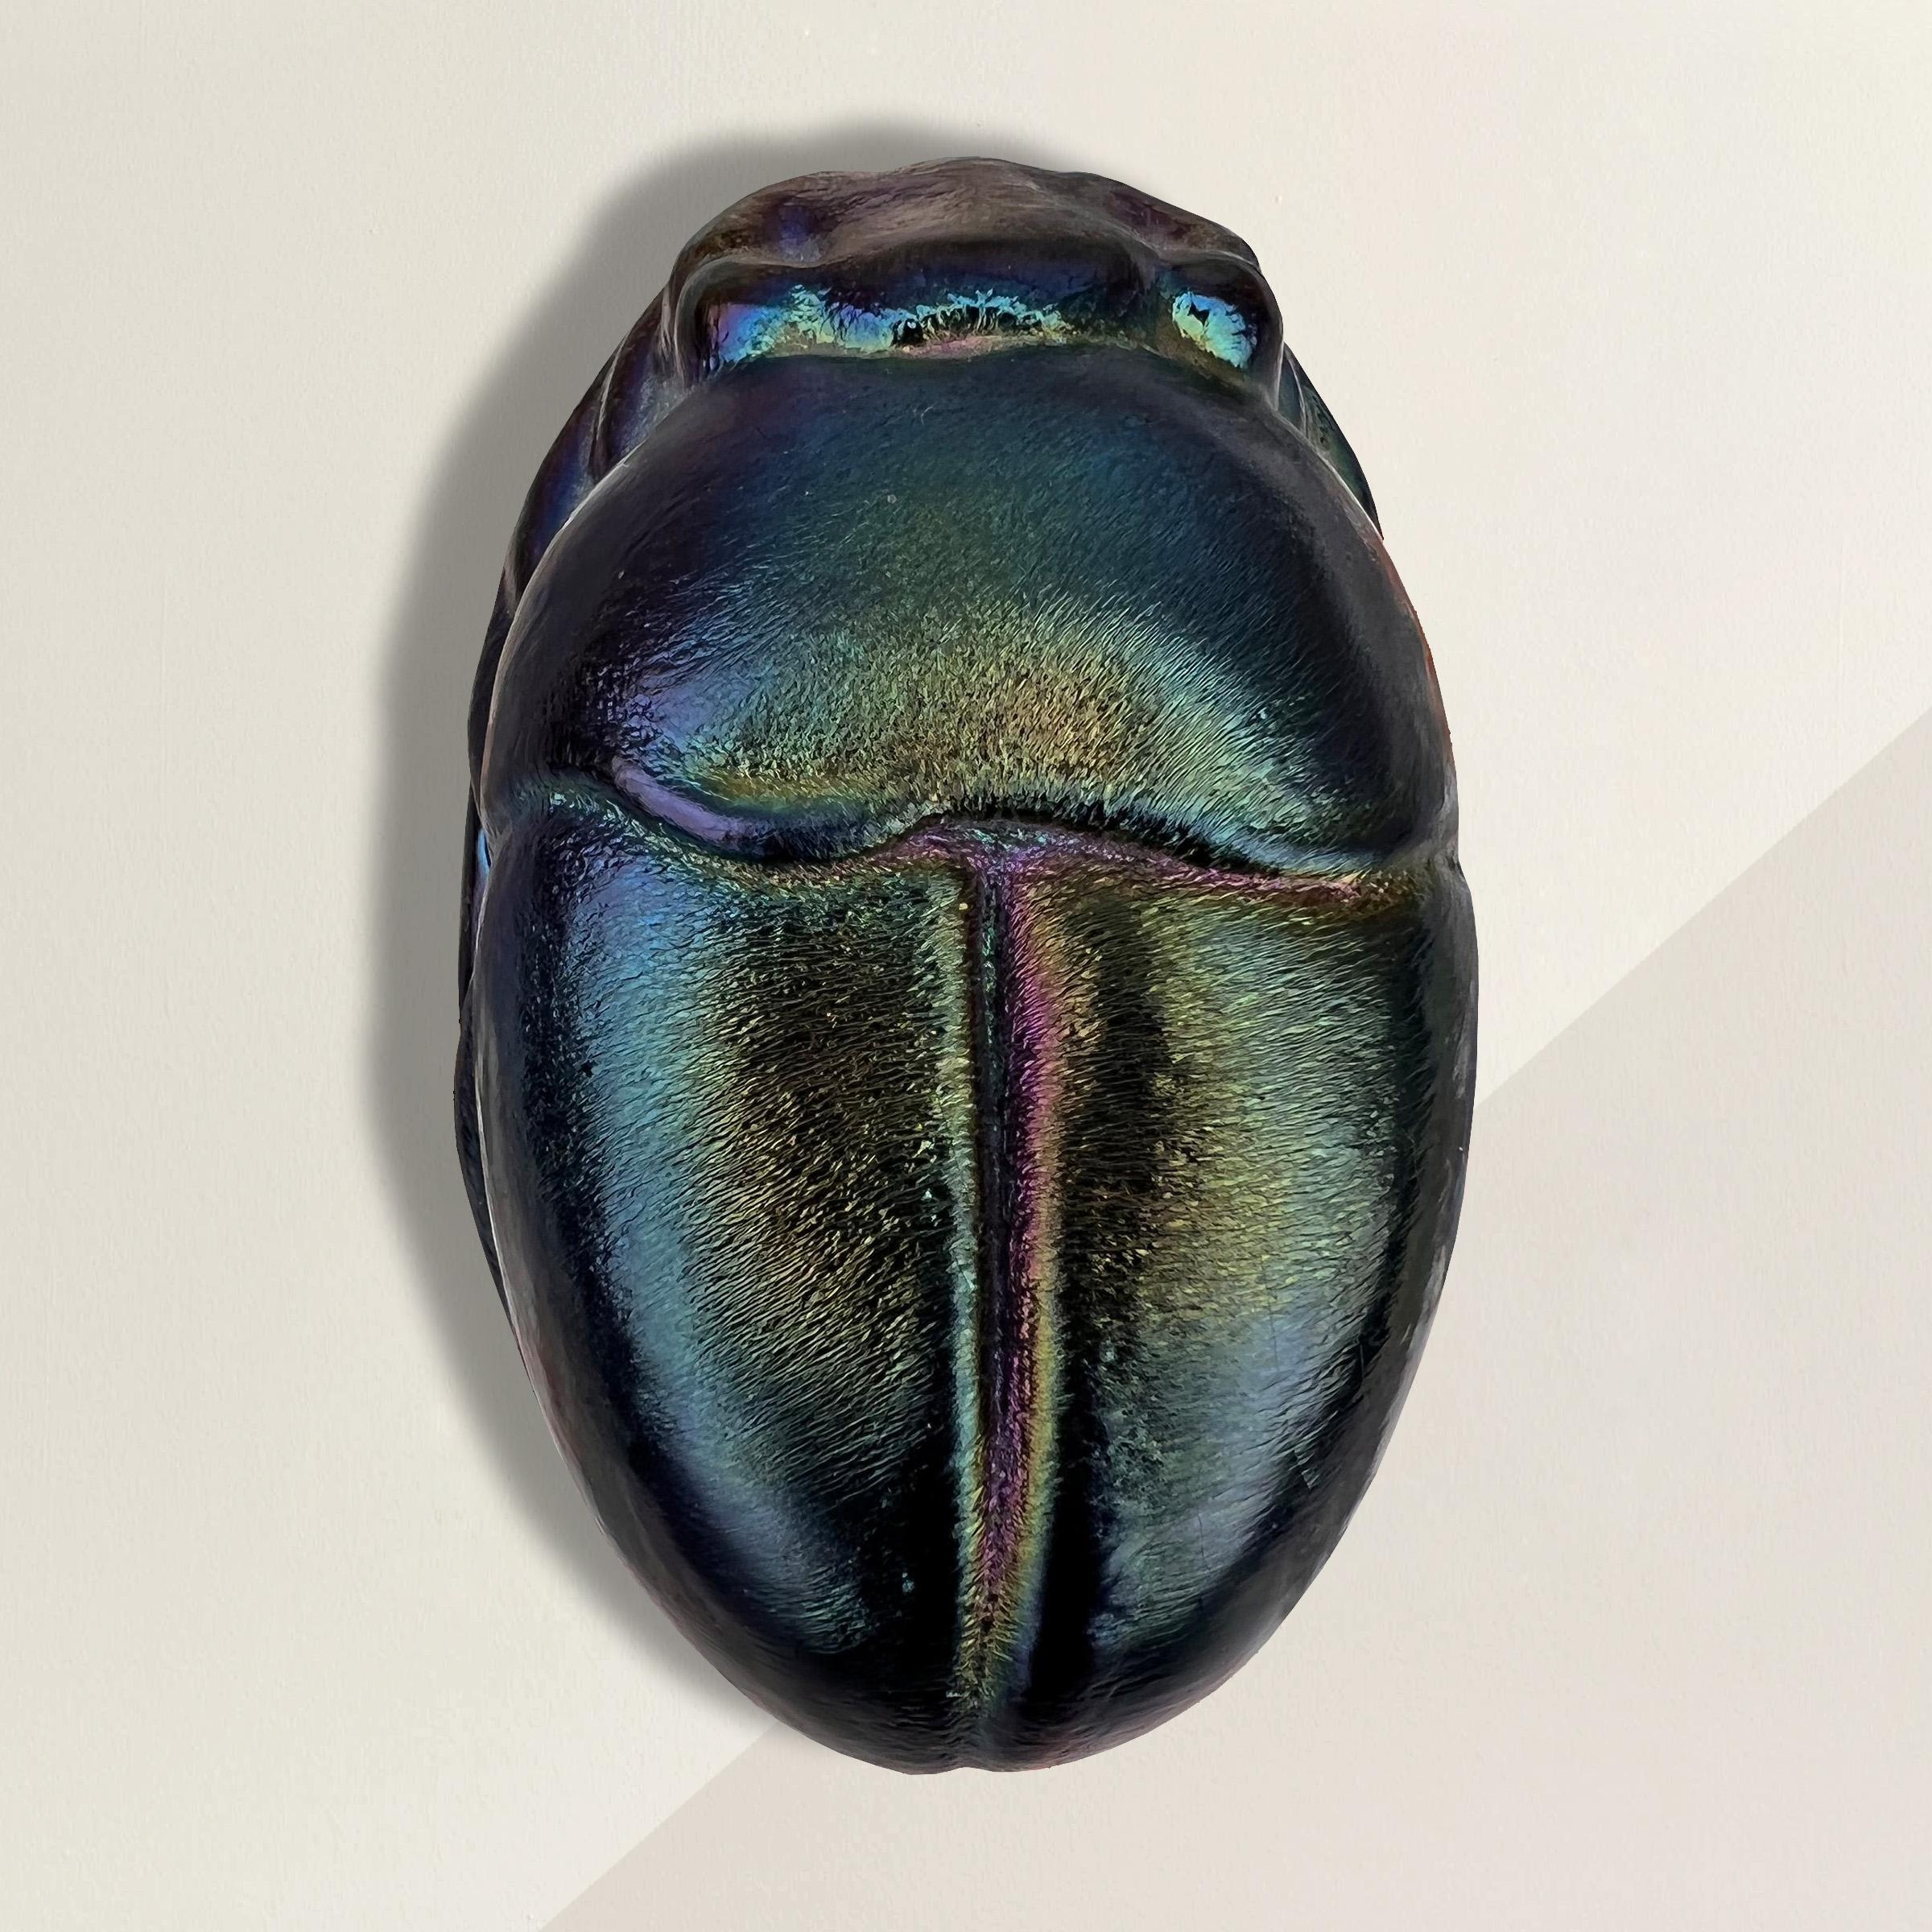 An incredible 20th century American cast glass scarab beetle with the most beautiful iridescent color and a texture to die for! In ancient Egypt, scarab beetles were harbingers of immortality and rebirth, and were believed to protect against disease